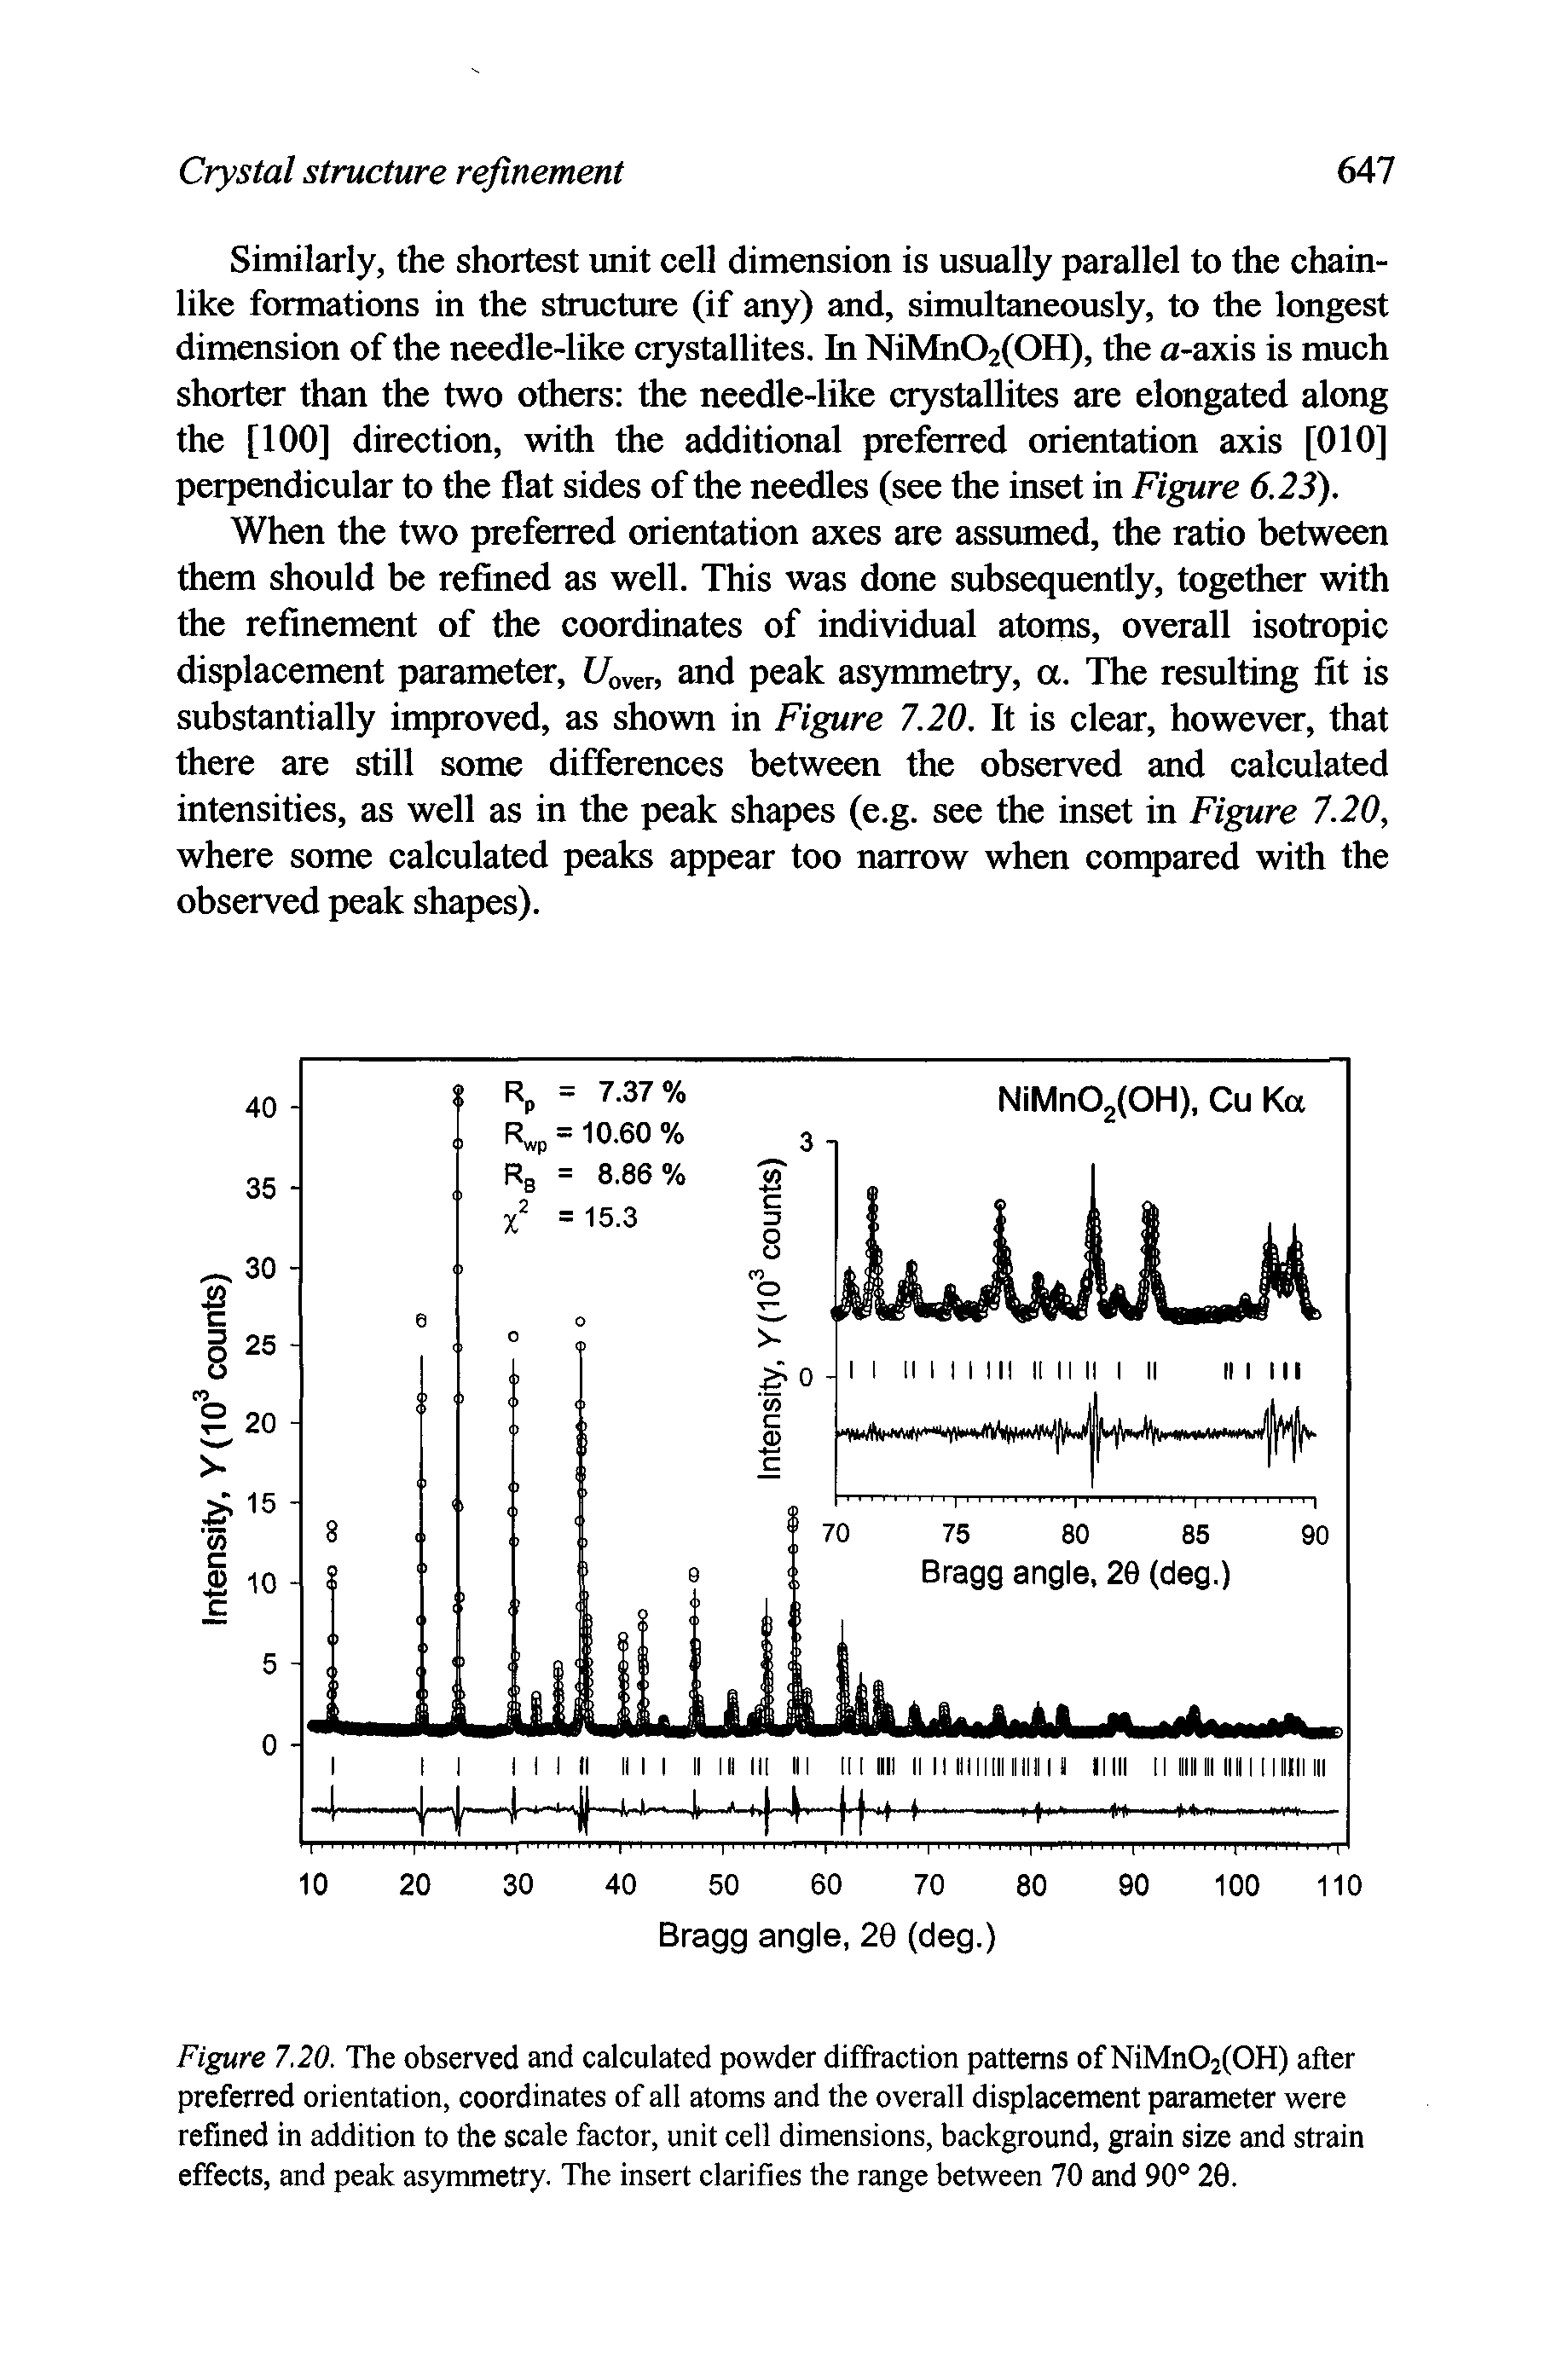 Figure 7.20. The observed and calculated powder diffraction patterns of NiMn02(OH) after preferred orientation, coordinates of all atoms and the overall displacement parameter were refined in addition to the scale factor, unit cell dimensions, background, grain size and strain effects, and peak asymmetry. The insert clarifies the range between 70 and 90° 20.